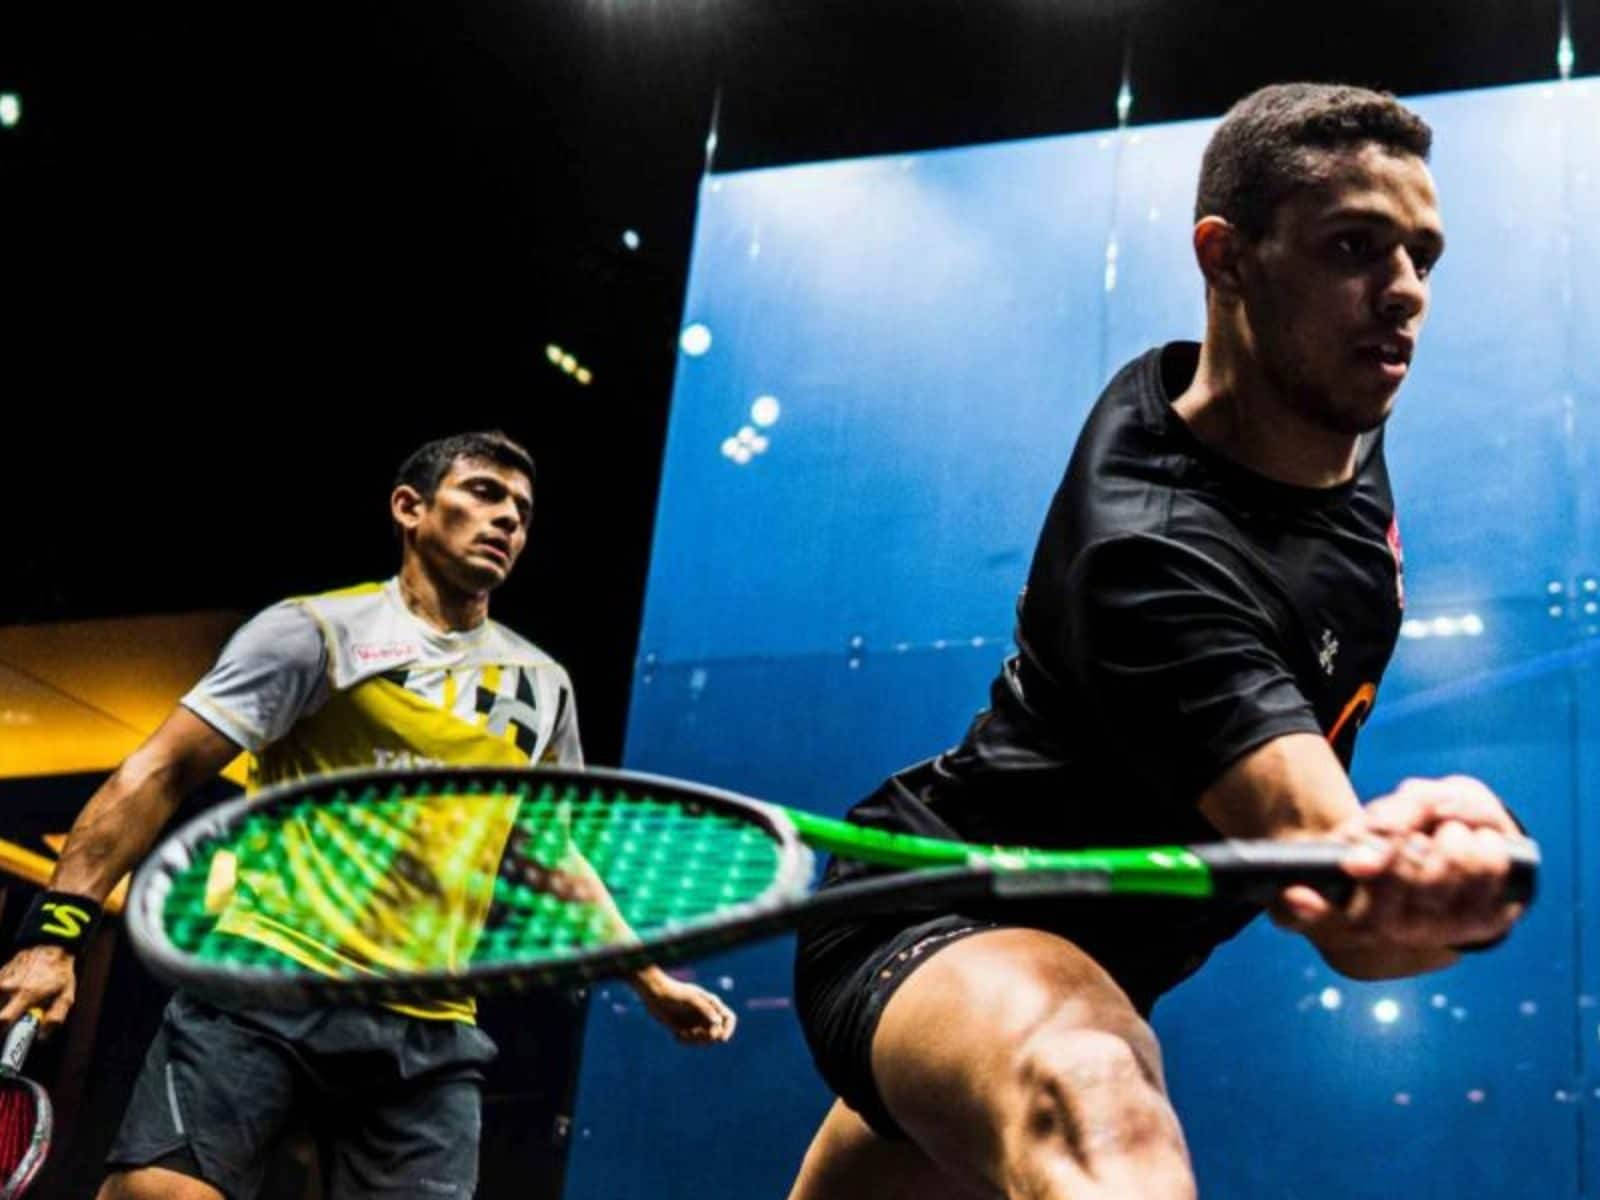 Two Athletic Boys Playing Squash Background